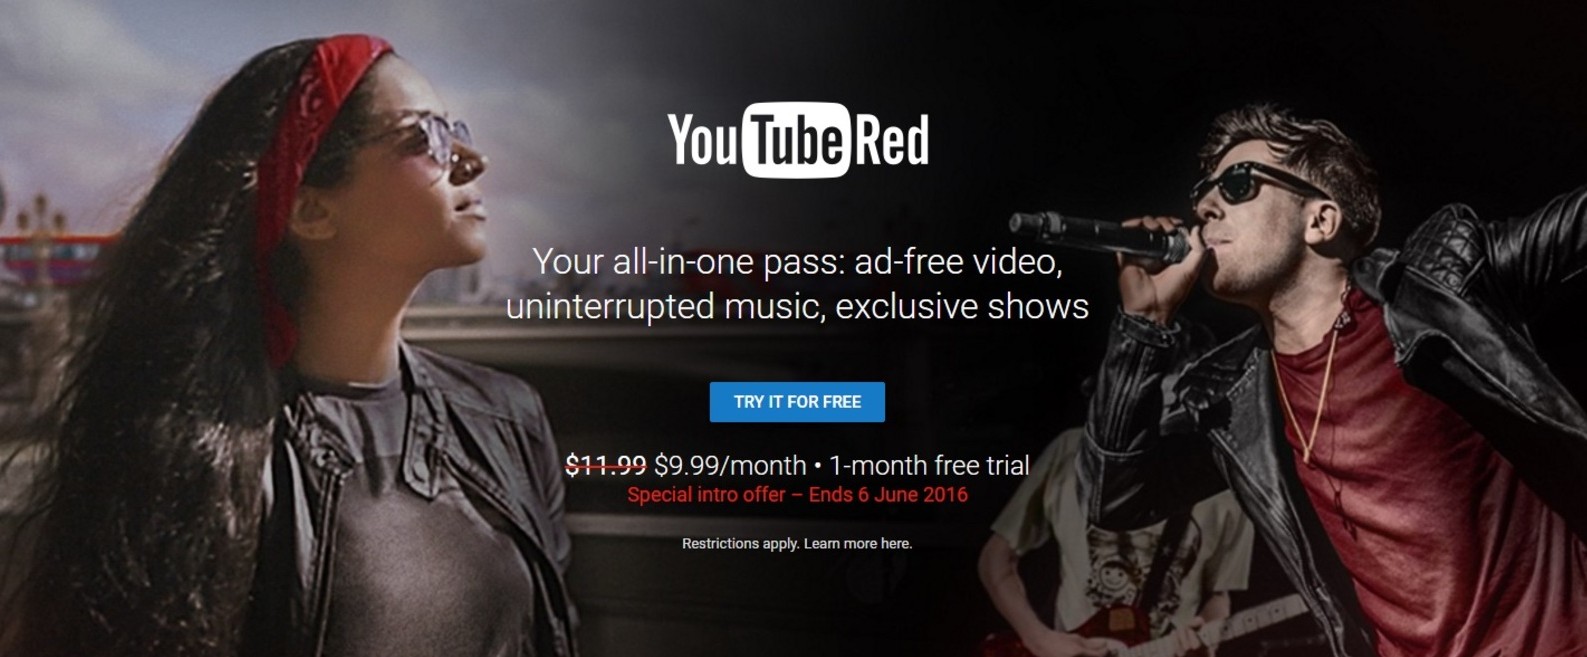 YouTube Red Now In Australia For Ad-Free & Offline Videos